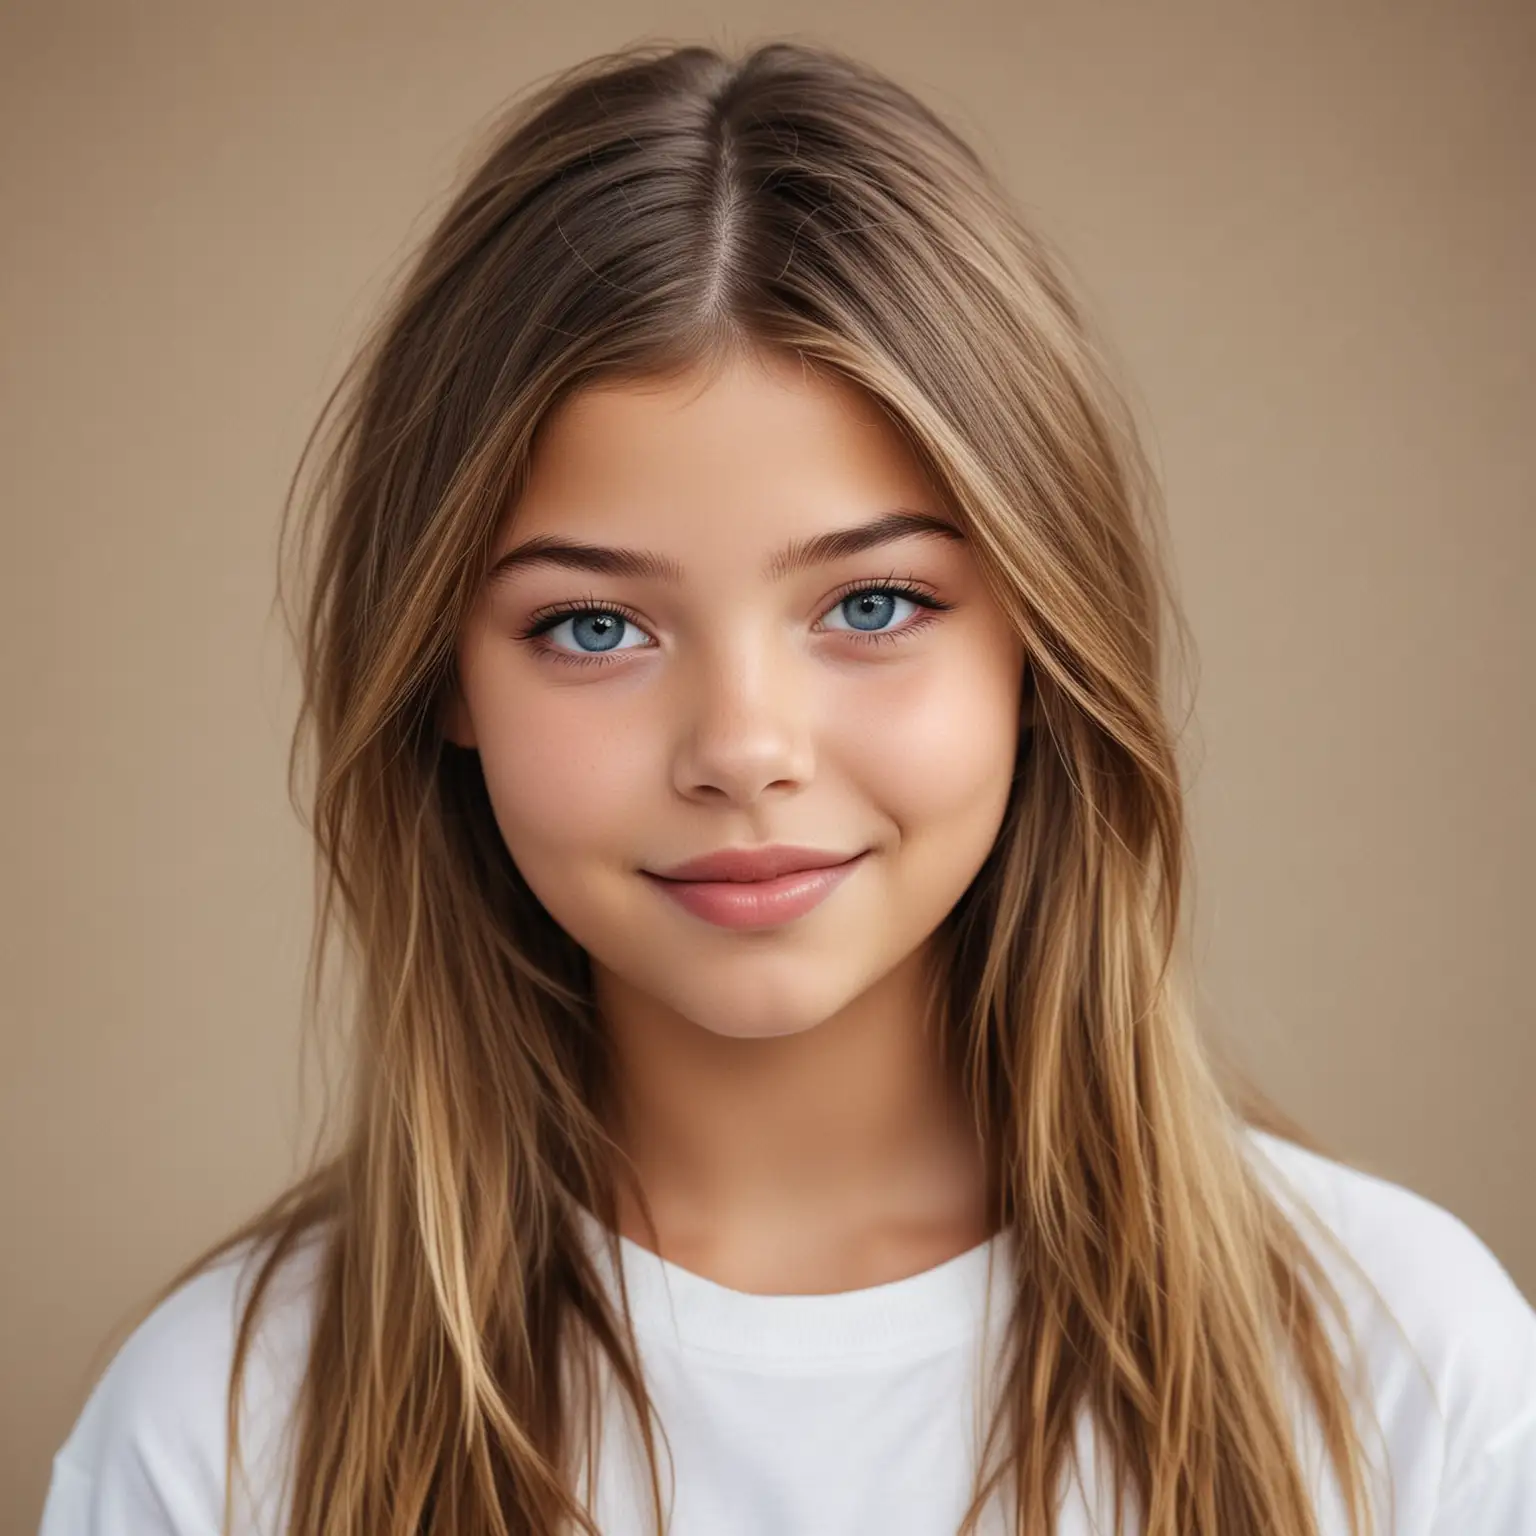 Portrait of Thylane Blondeau a Charming French Girl with a Heartshaped Face and Vivid Blue Eyes